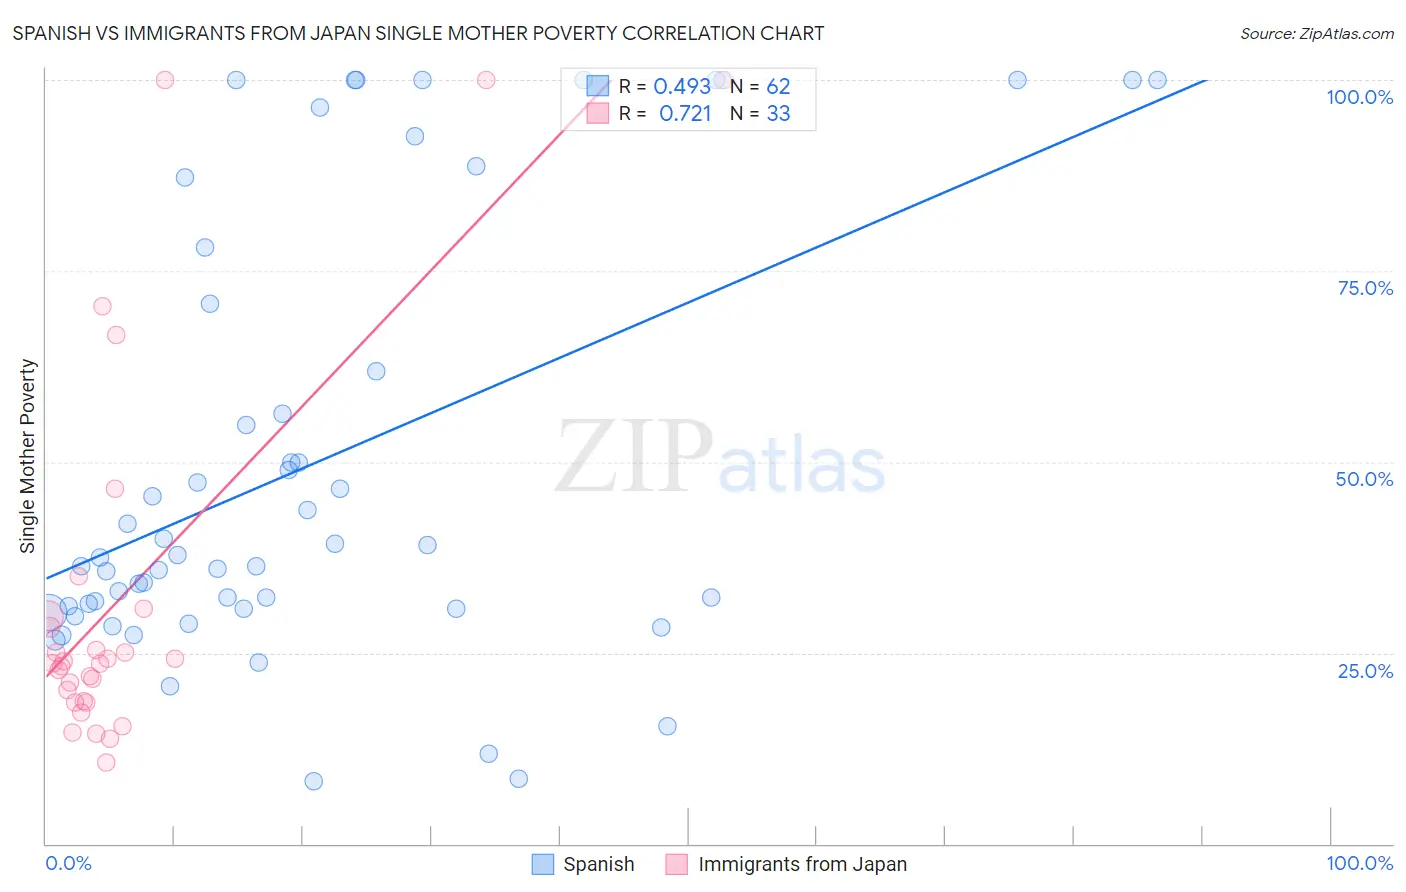 Spanish vs Immigrants from Japan Single Mother Poverty